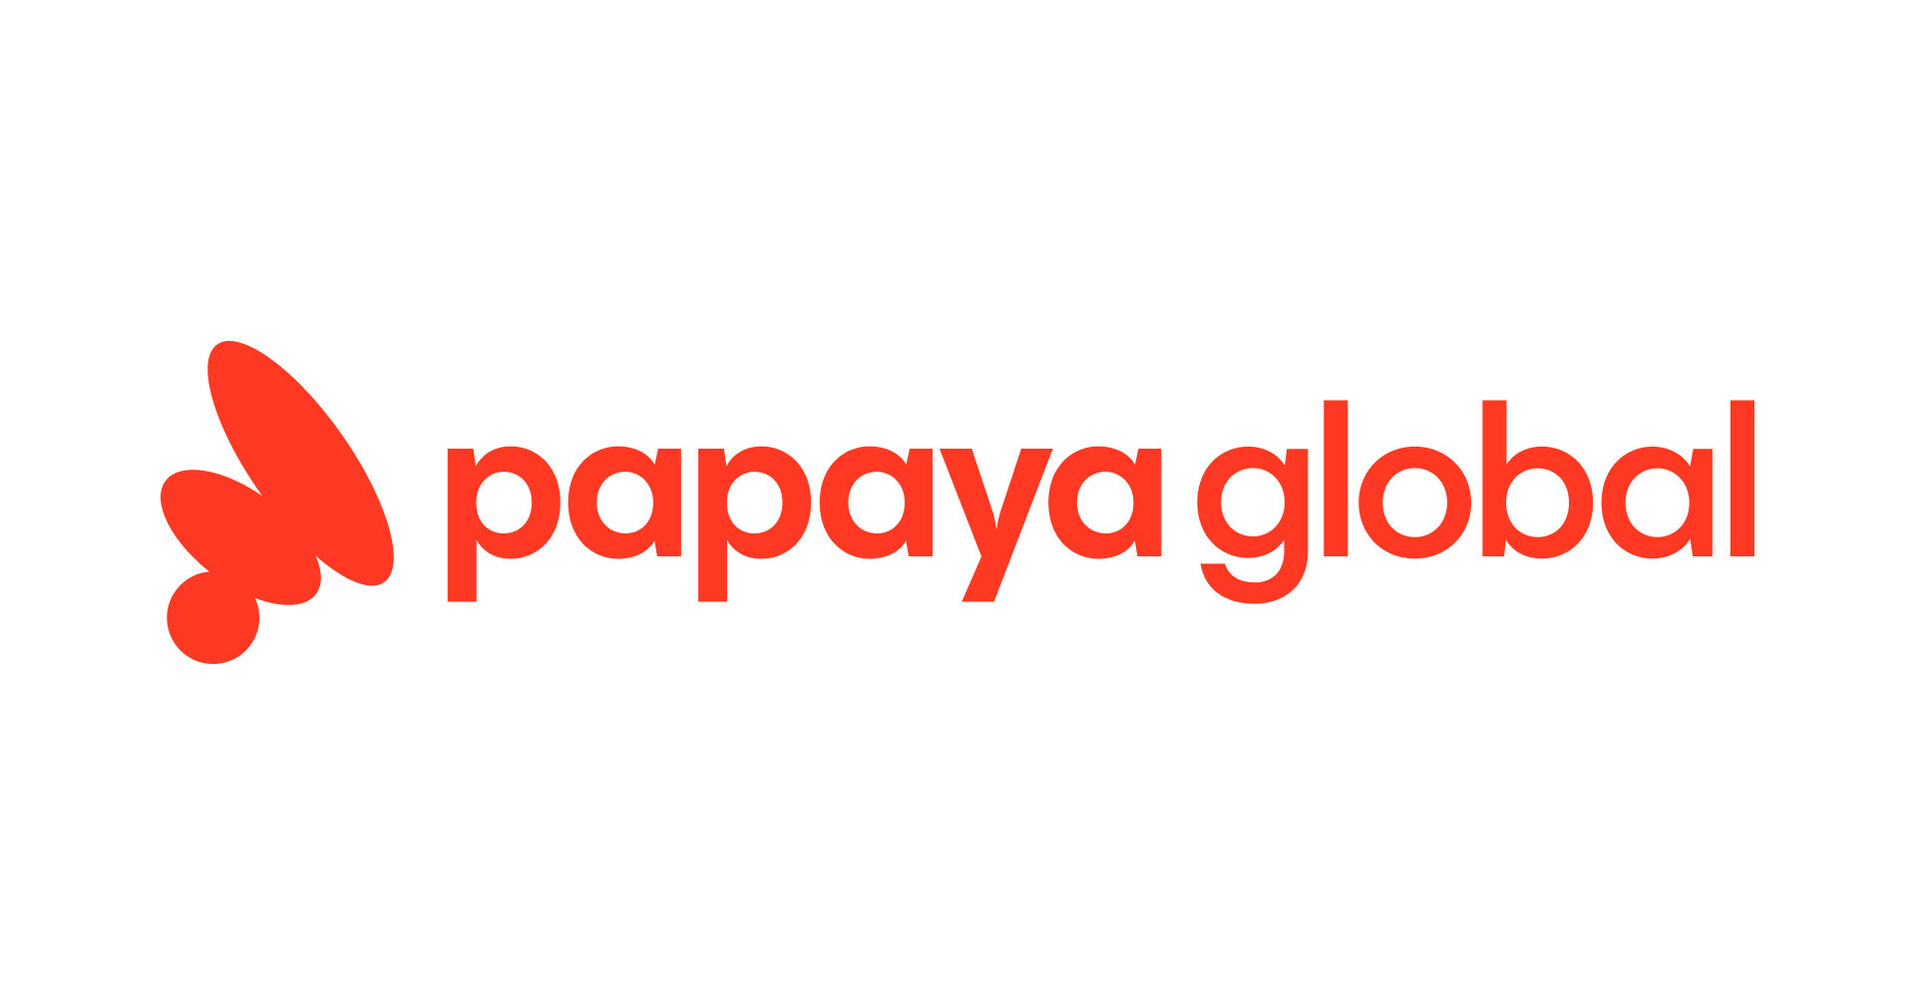 Why Papaya Global Is Placing A $7M Bet On A Super Bowl Ad